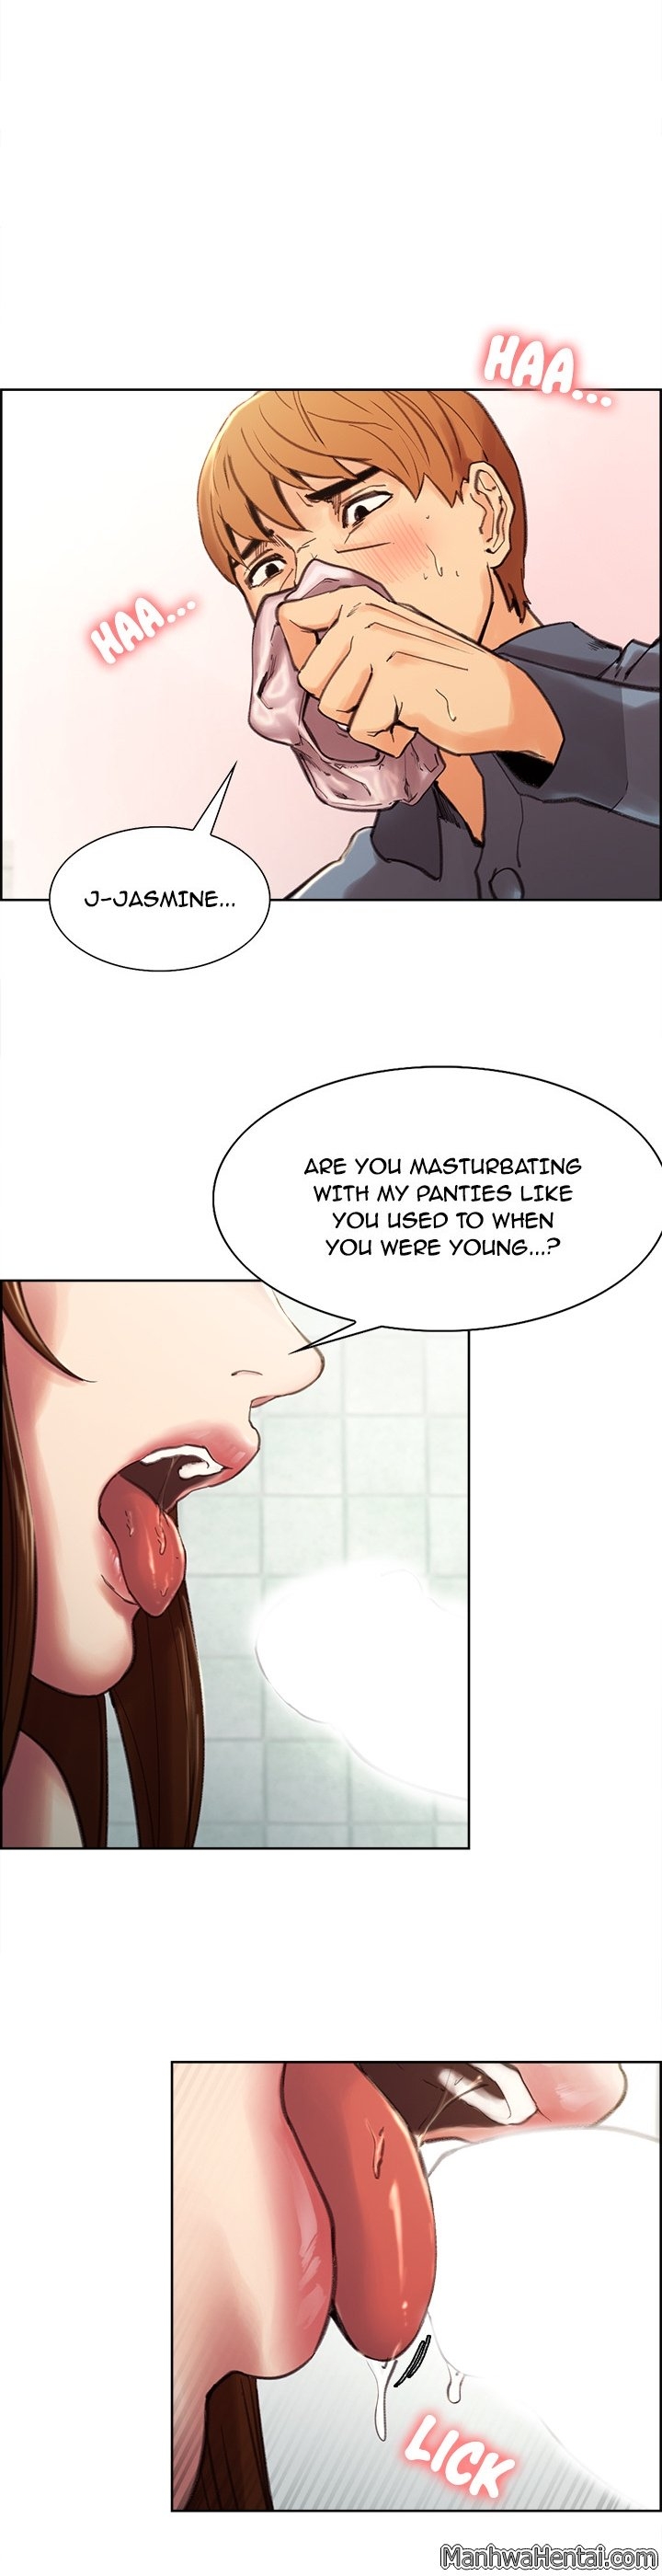 [Serious] The Sharehouse Ch. 1-11 [English] 288